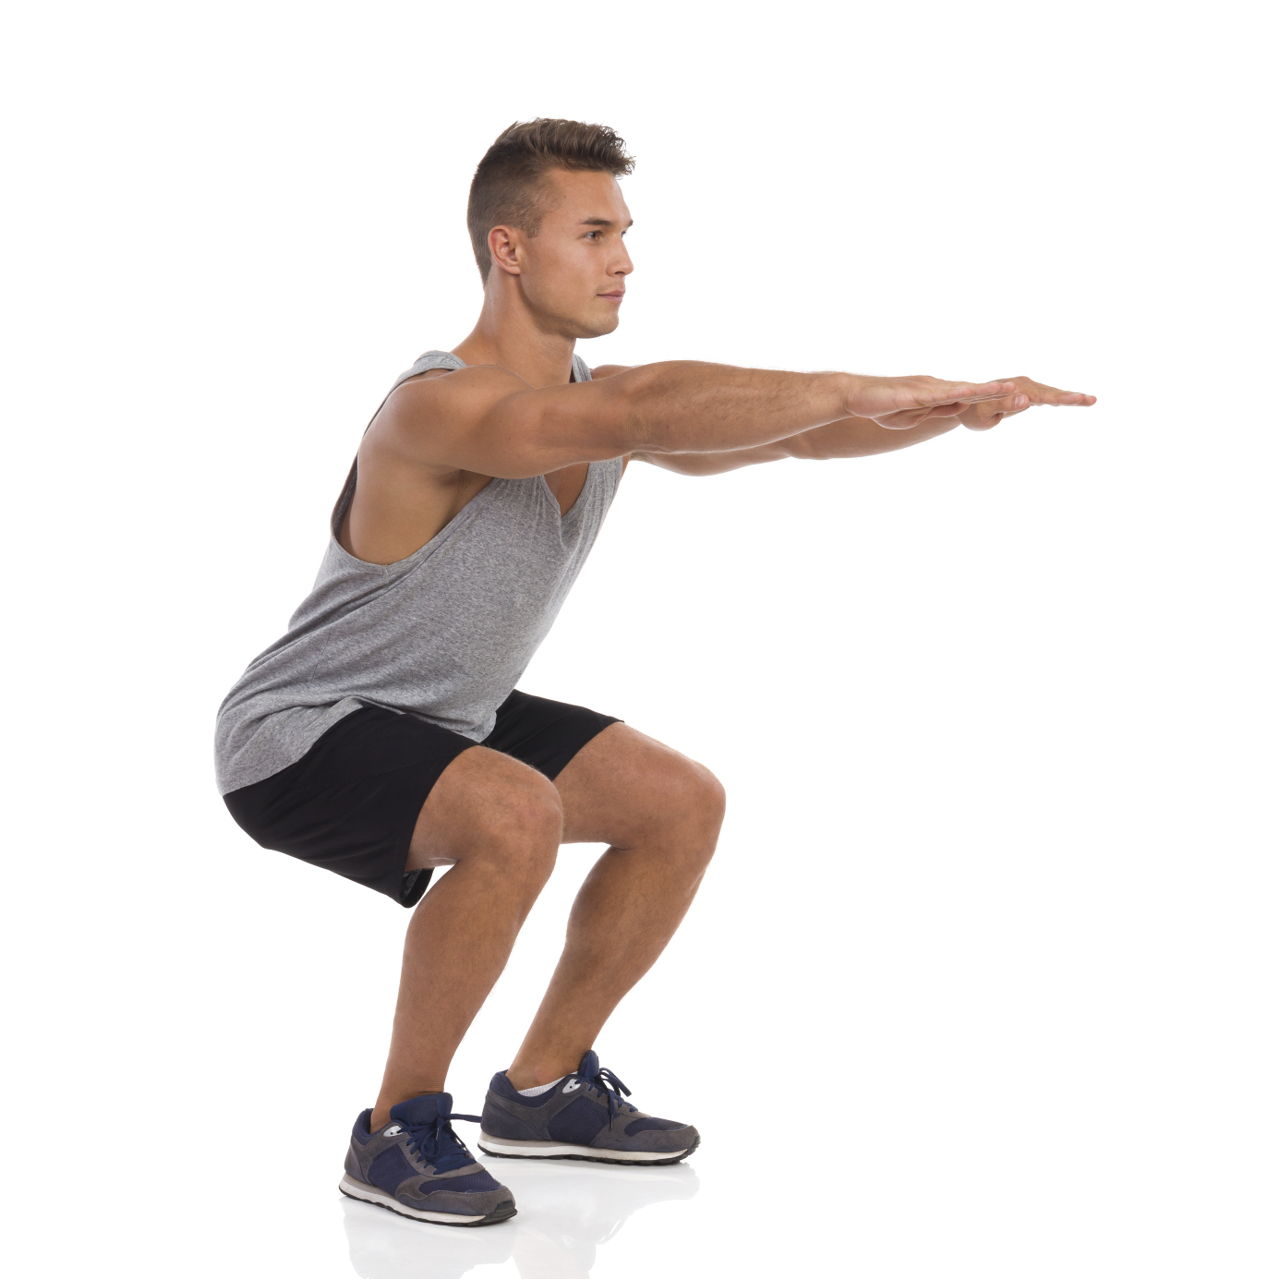 Bodyweight Exercises for Mass